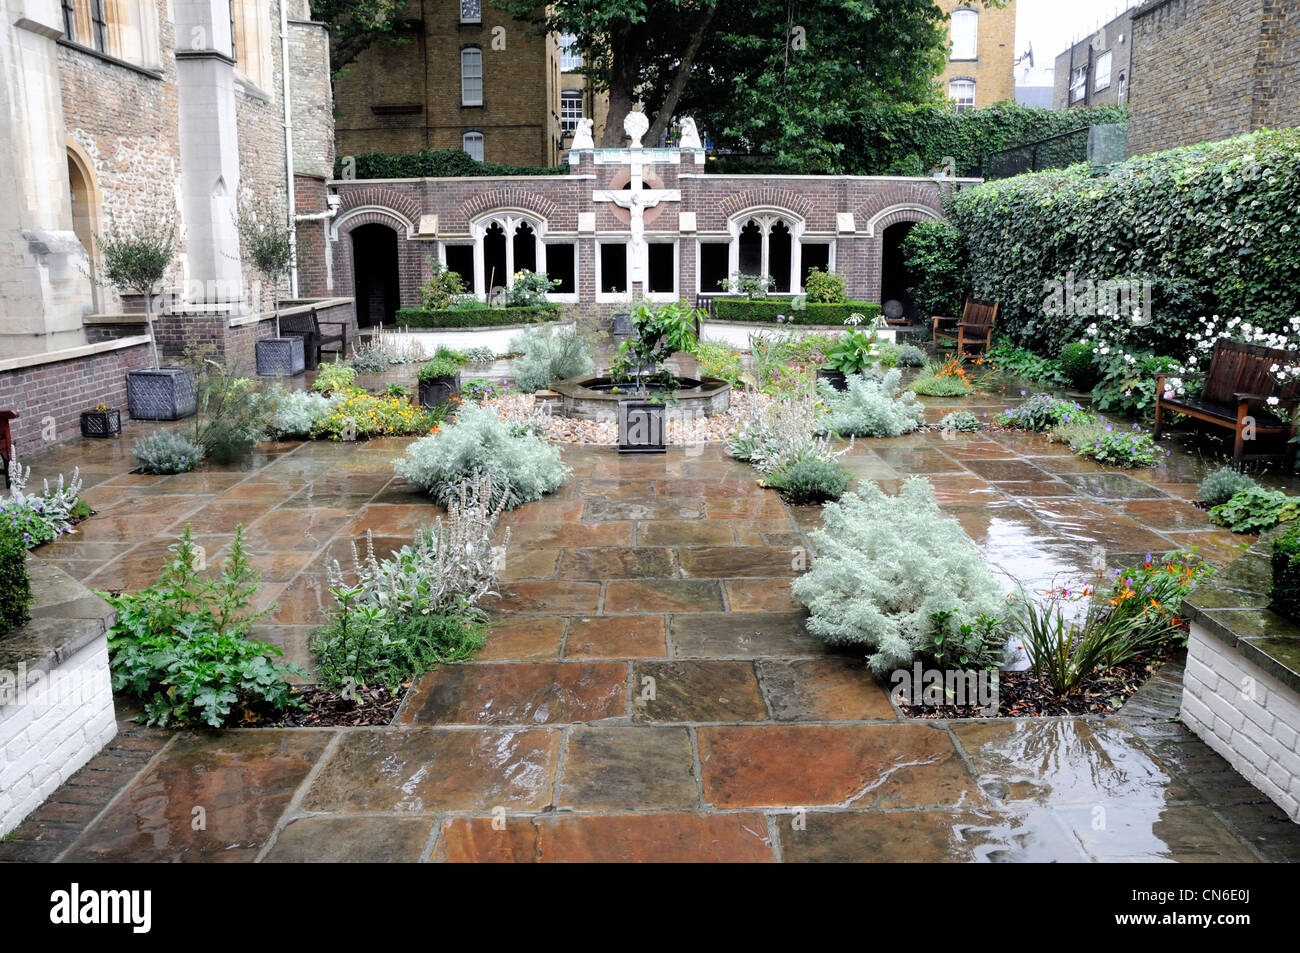 The Garden Of The Priory Church Of The Order Of St John Clerkenwell London England Uk Stock Photo Alamy